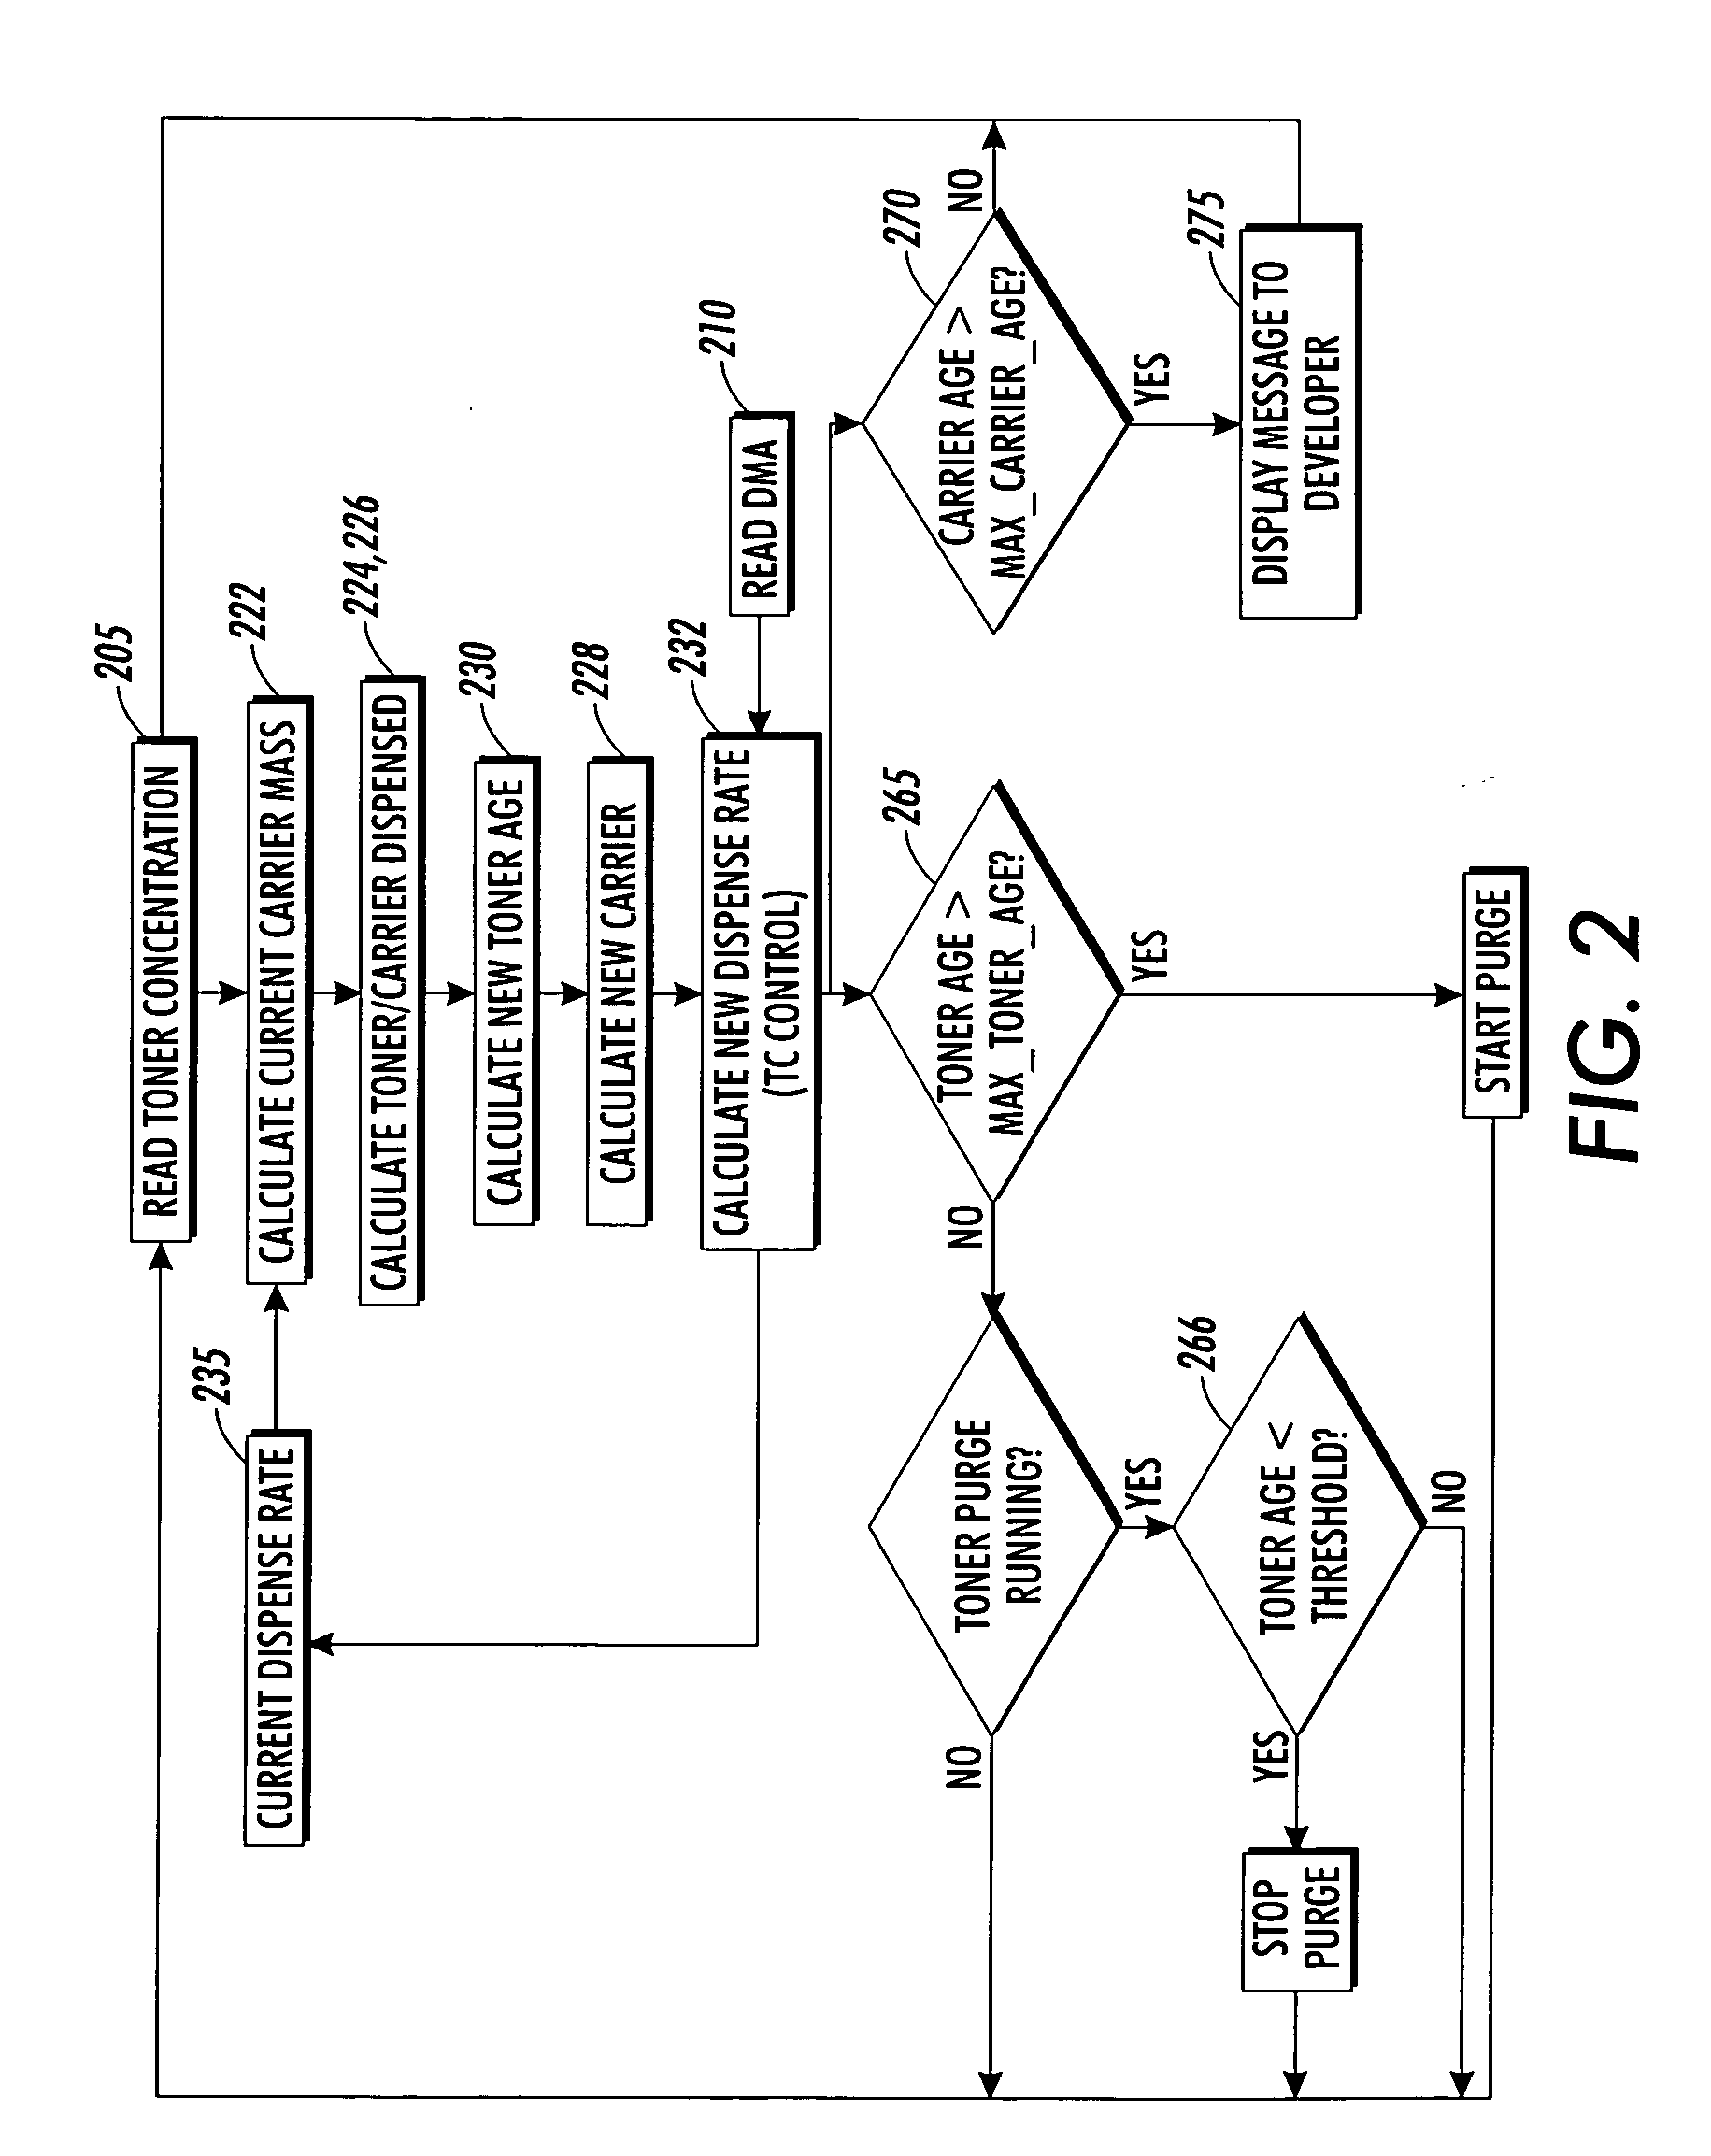 Method for calculating toner age and a method for calculating carrier age for use in print engine diagnostics